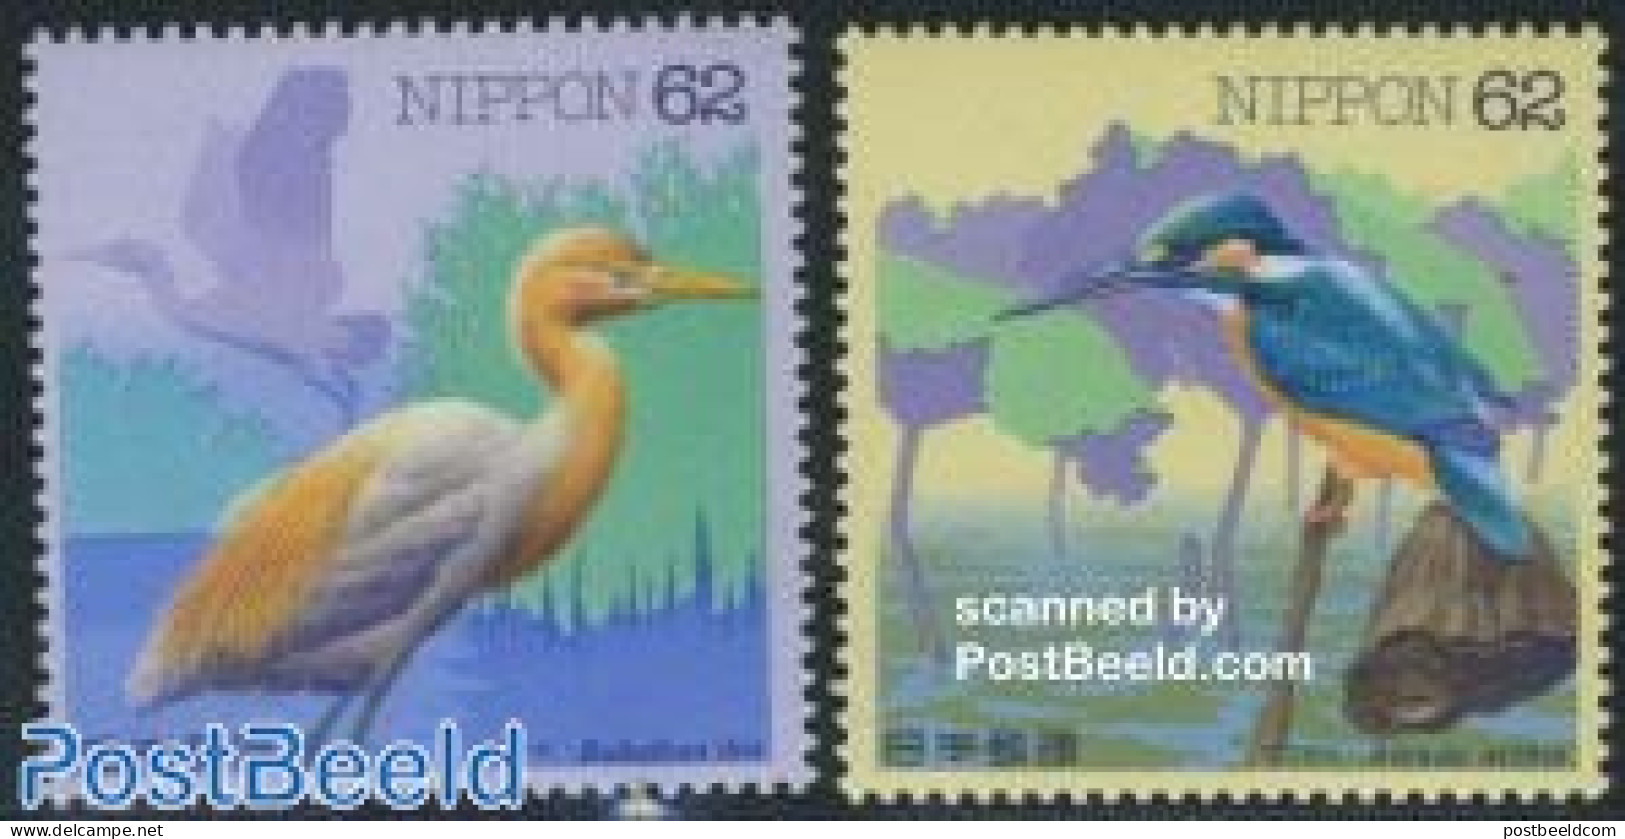 Japan 1993 Water Birds 2v, Mint NH, Nature - Birds - Kingfishers - Unused Stamps